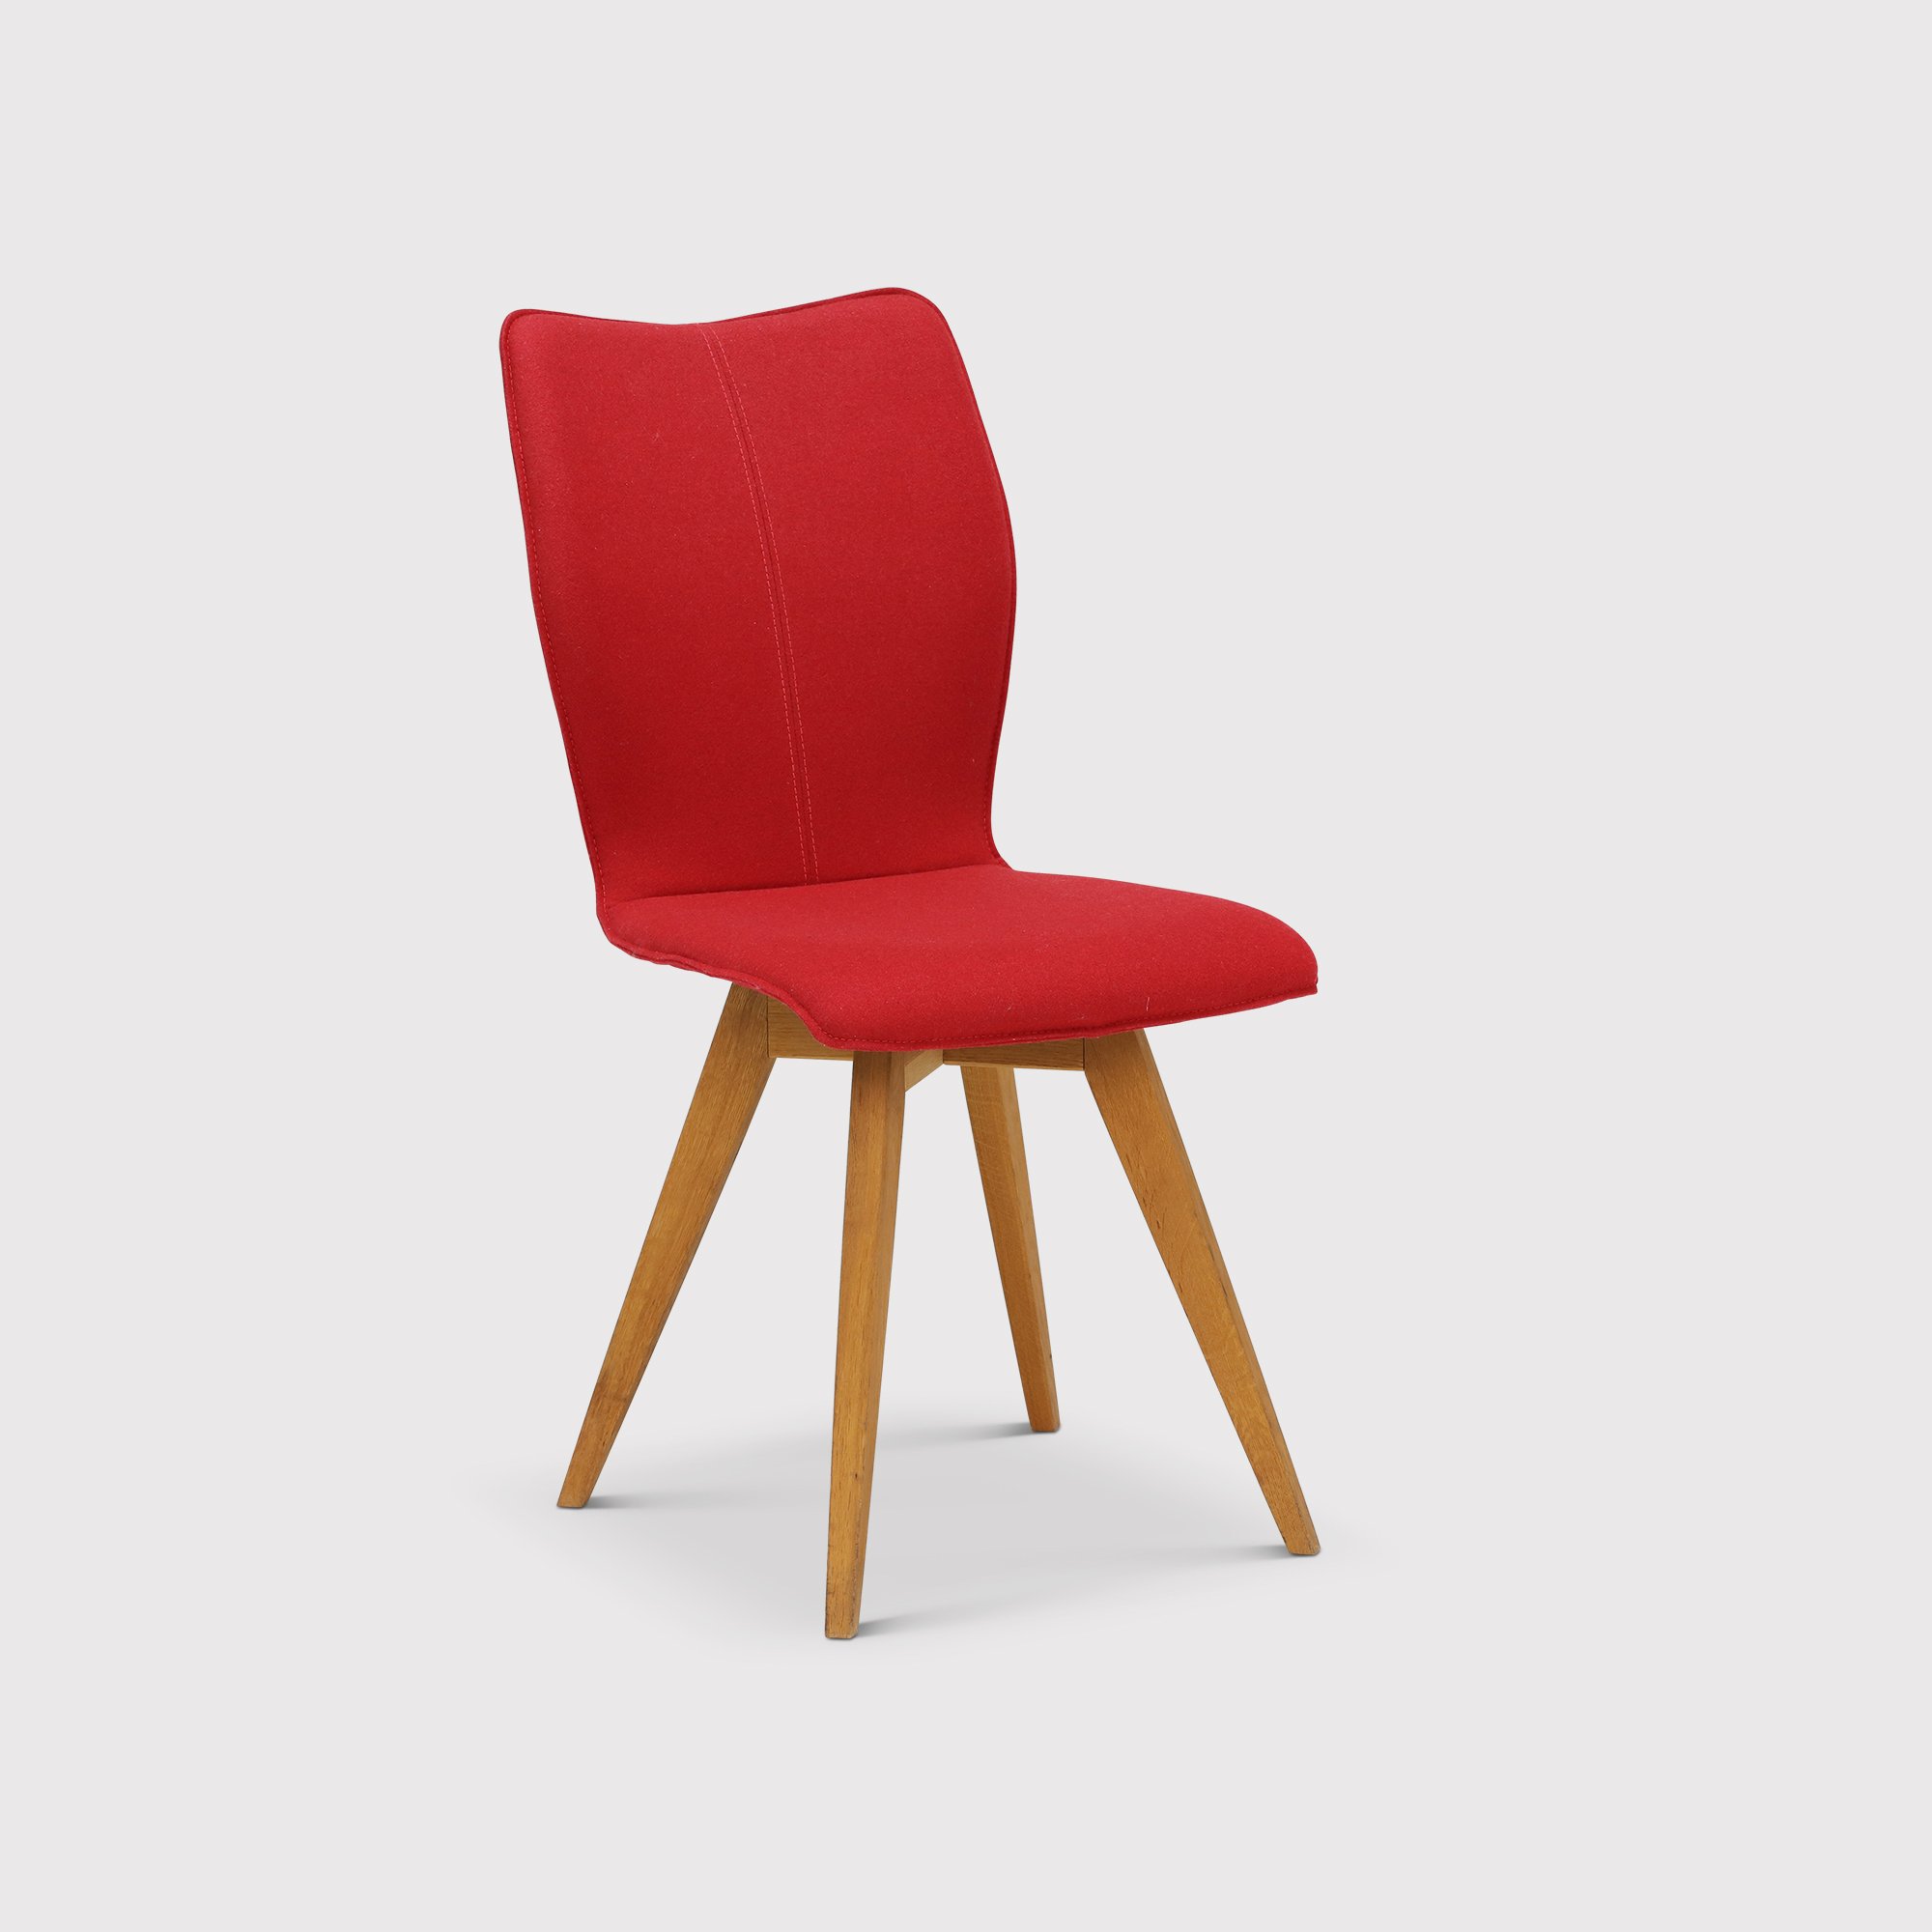 Poppy Dining Chair With Oak Legs, Red | Barker & Stonehouse